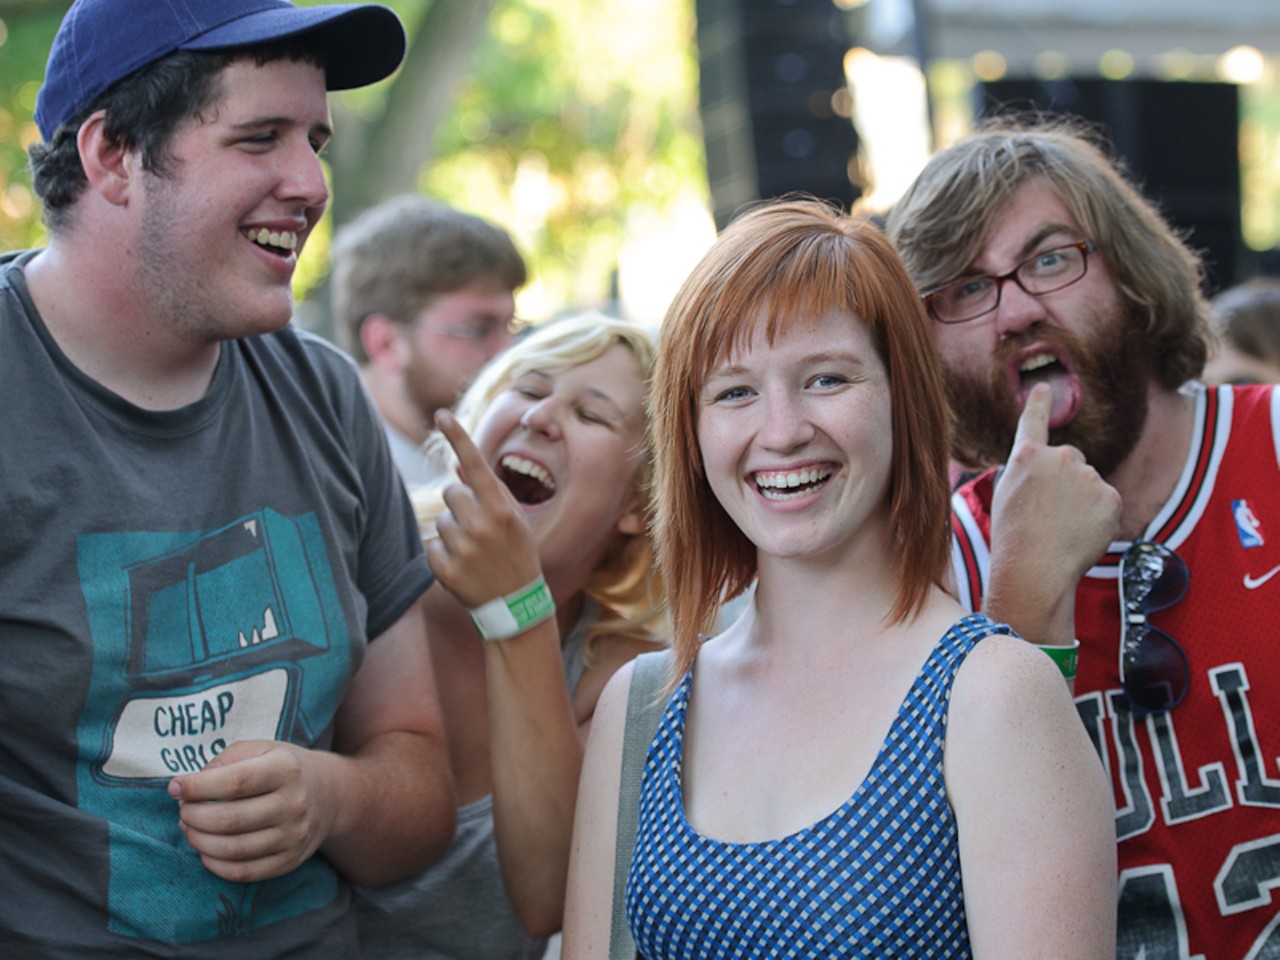 Fans at the Pitchfork Music Festival 2010 in Chicago.